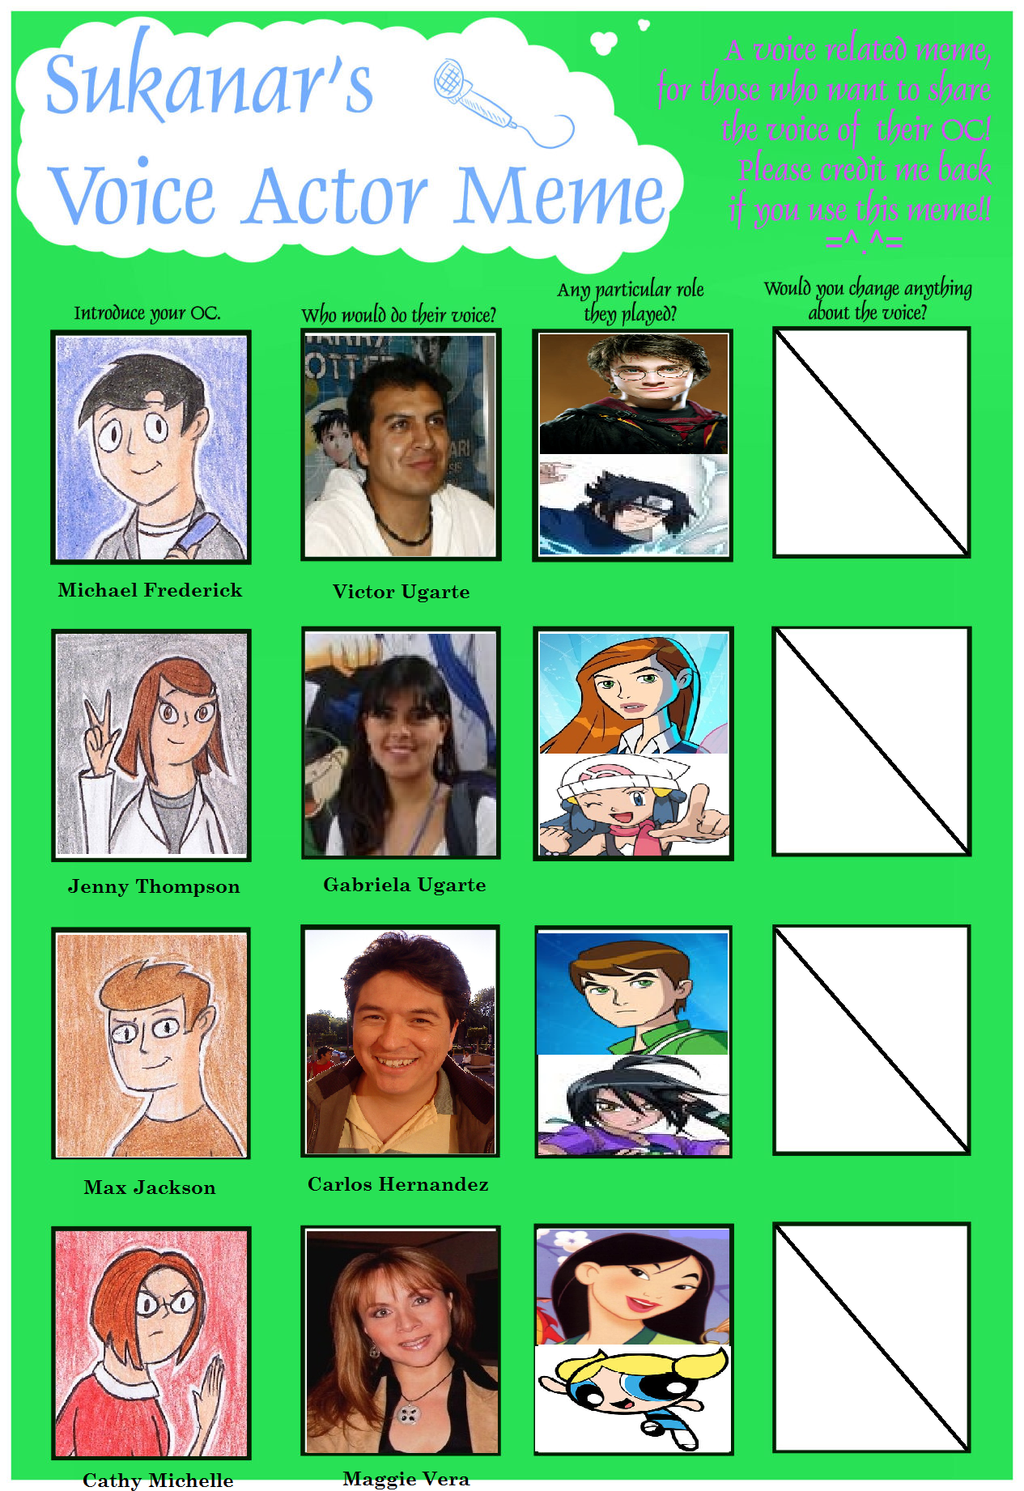 voice actor meme by young creator deviantart related devious fun memes 